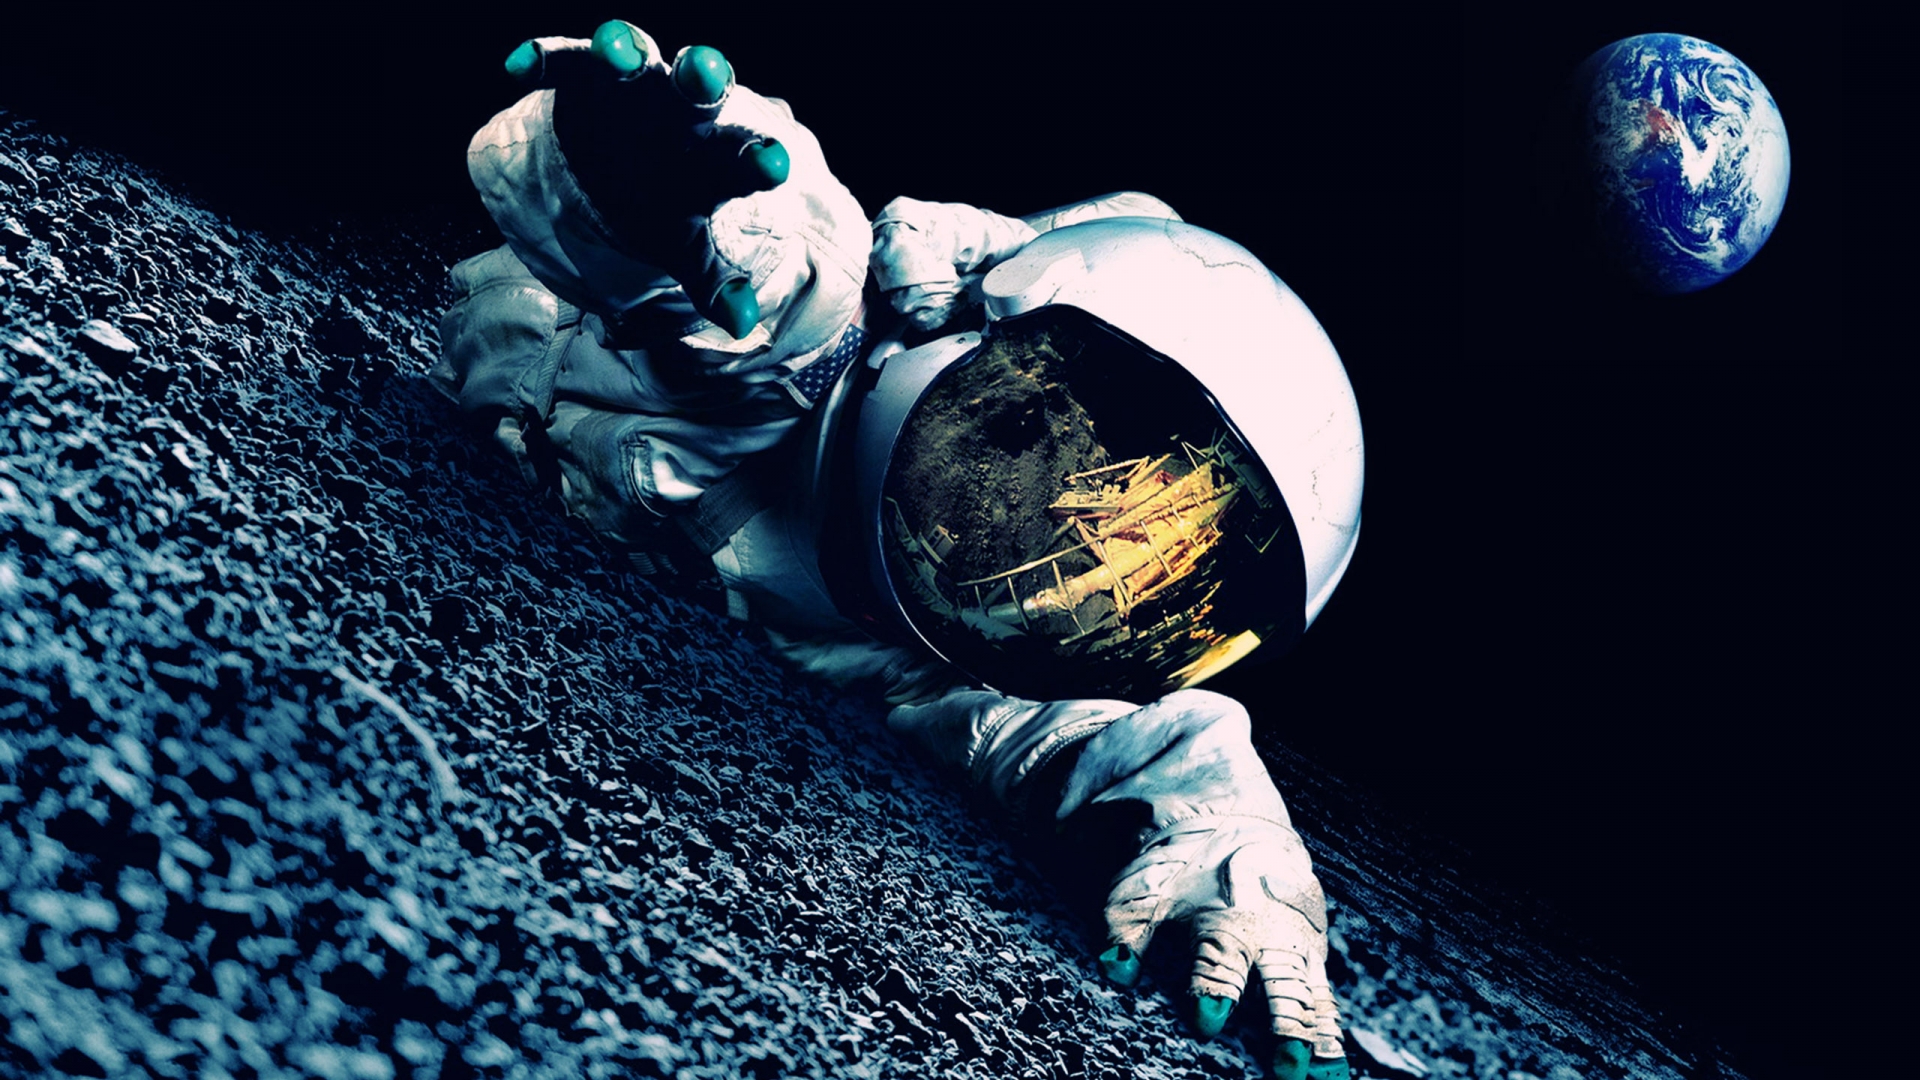 astronaut, Mood, Earth, Planets, Mask, Reflection, Dark, Horror Wallpaper HD / Desktop and Mobile Background